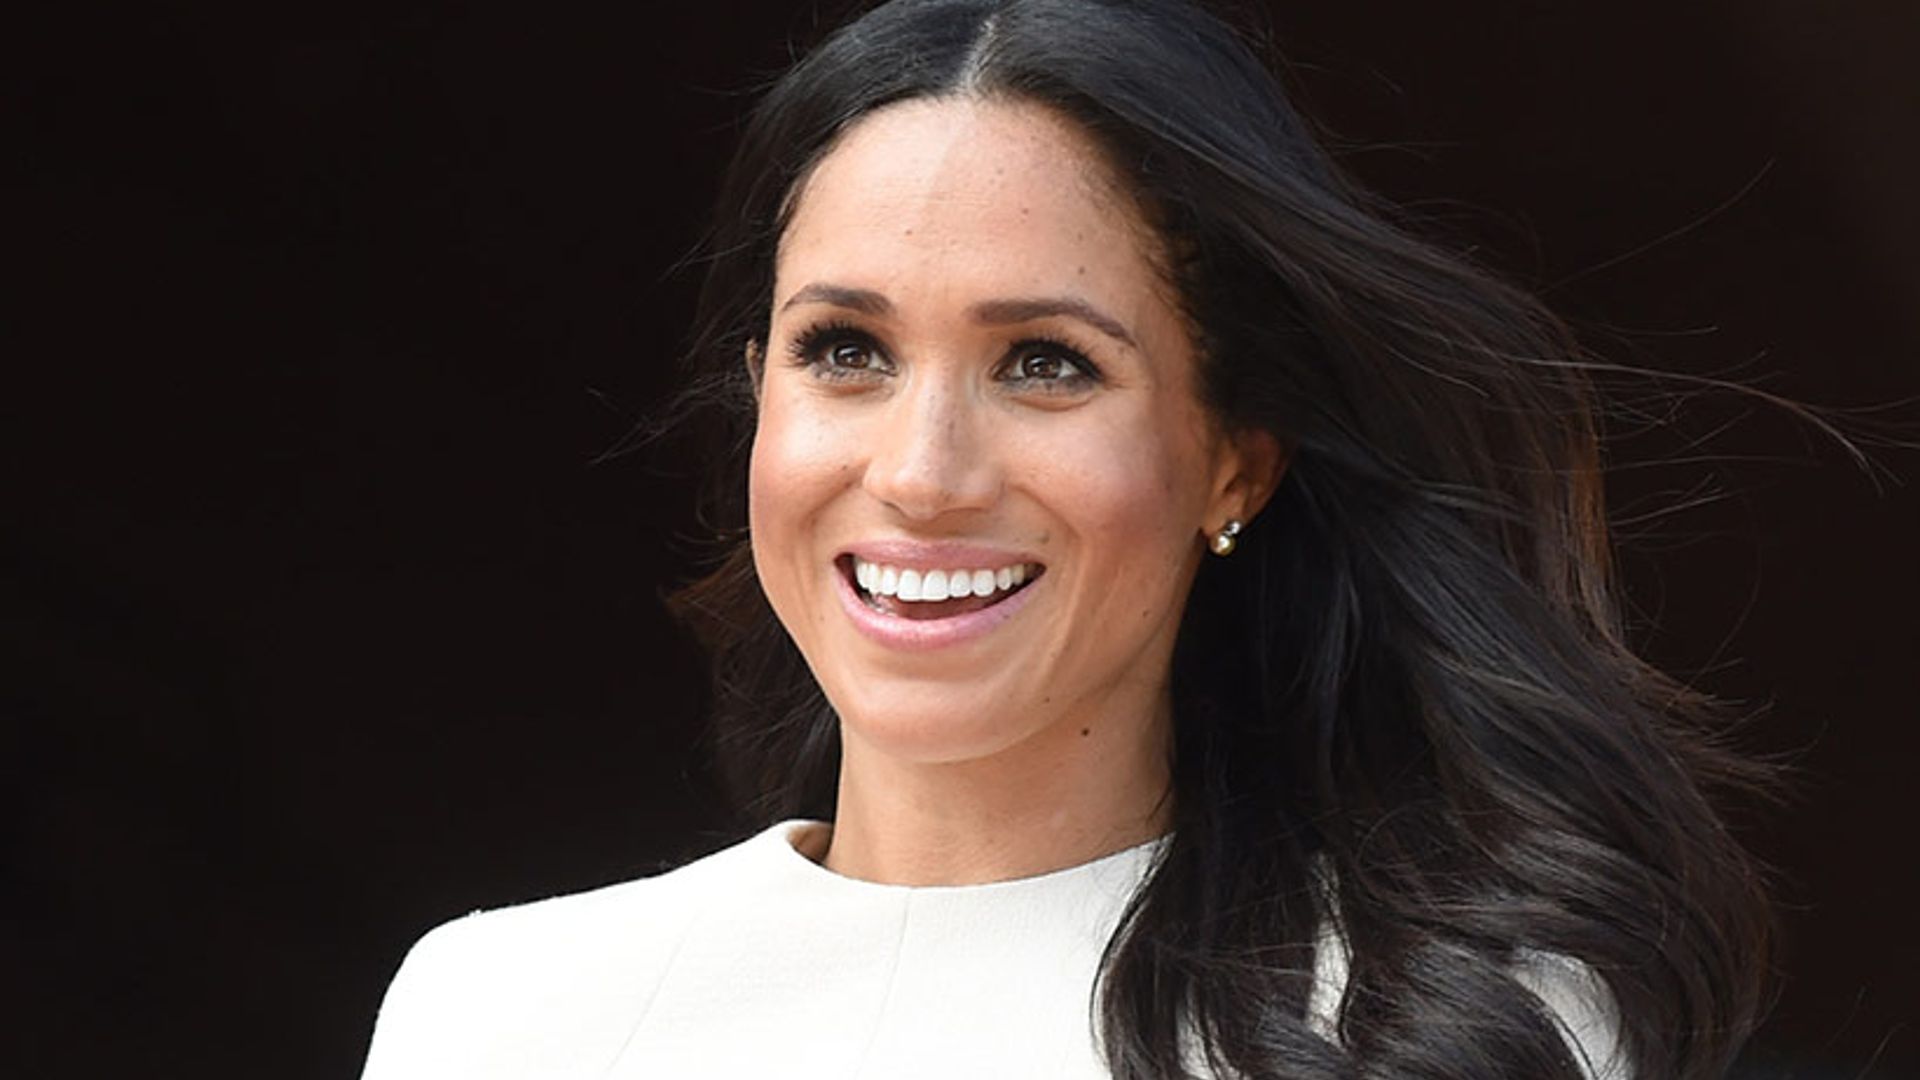 This is what Meghan Markle would look like as a blonde